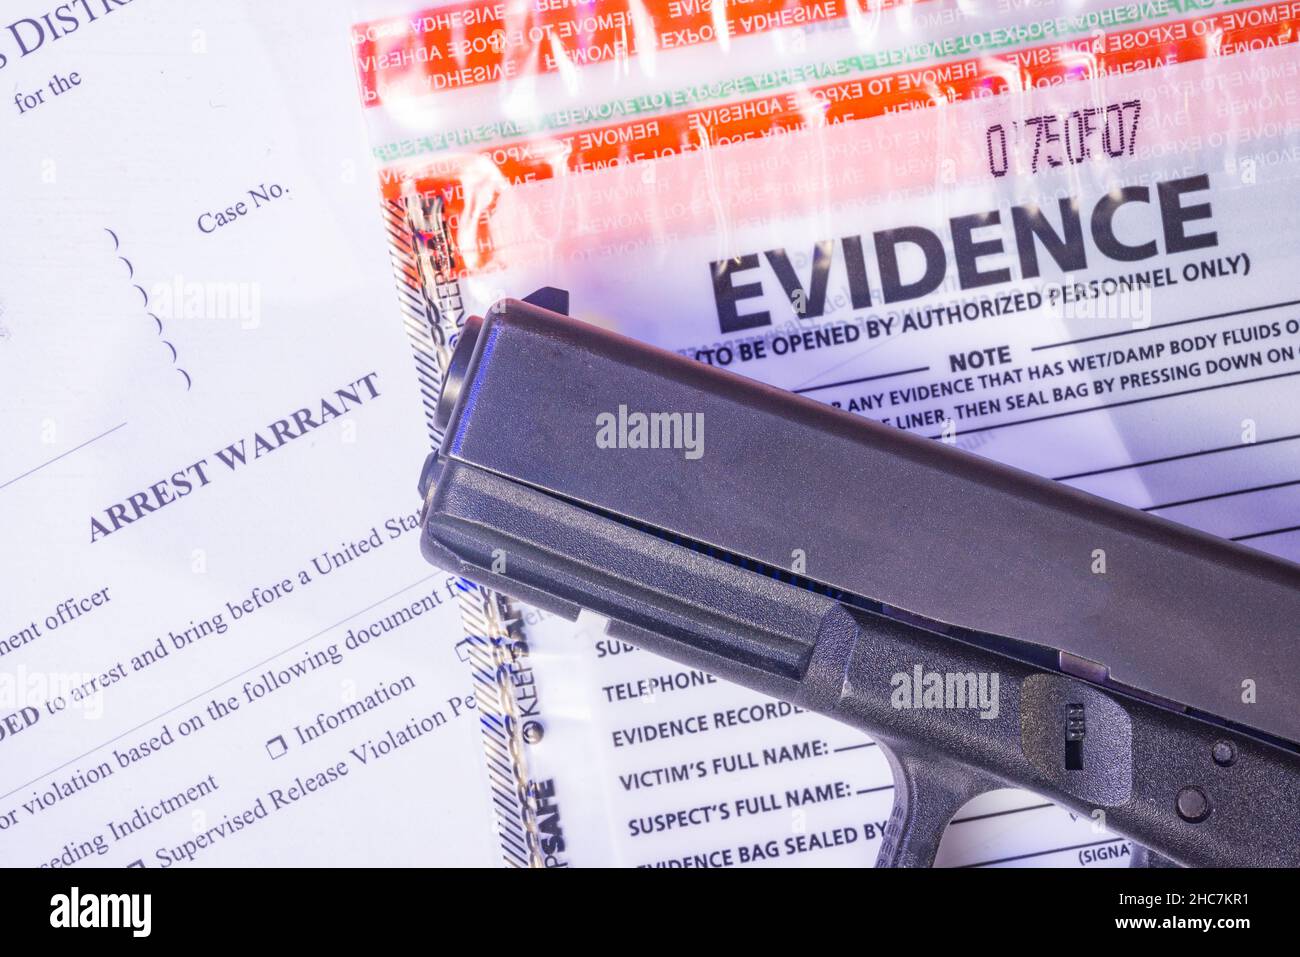 A firearm sits on an evidence bag and arrest warrant form. Stock Photo